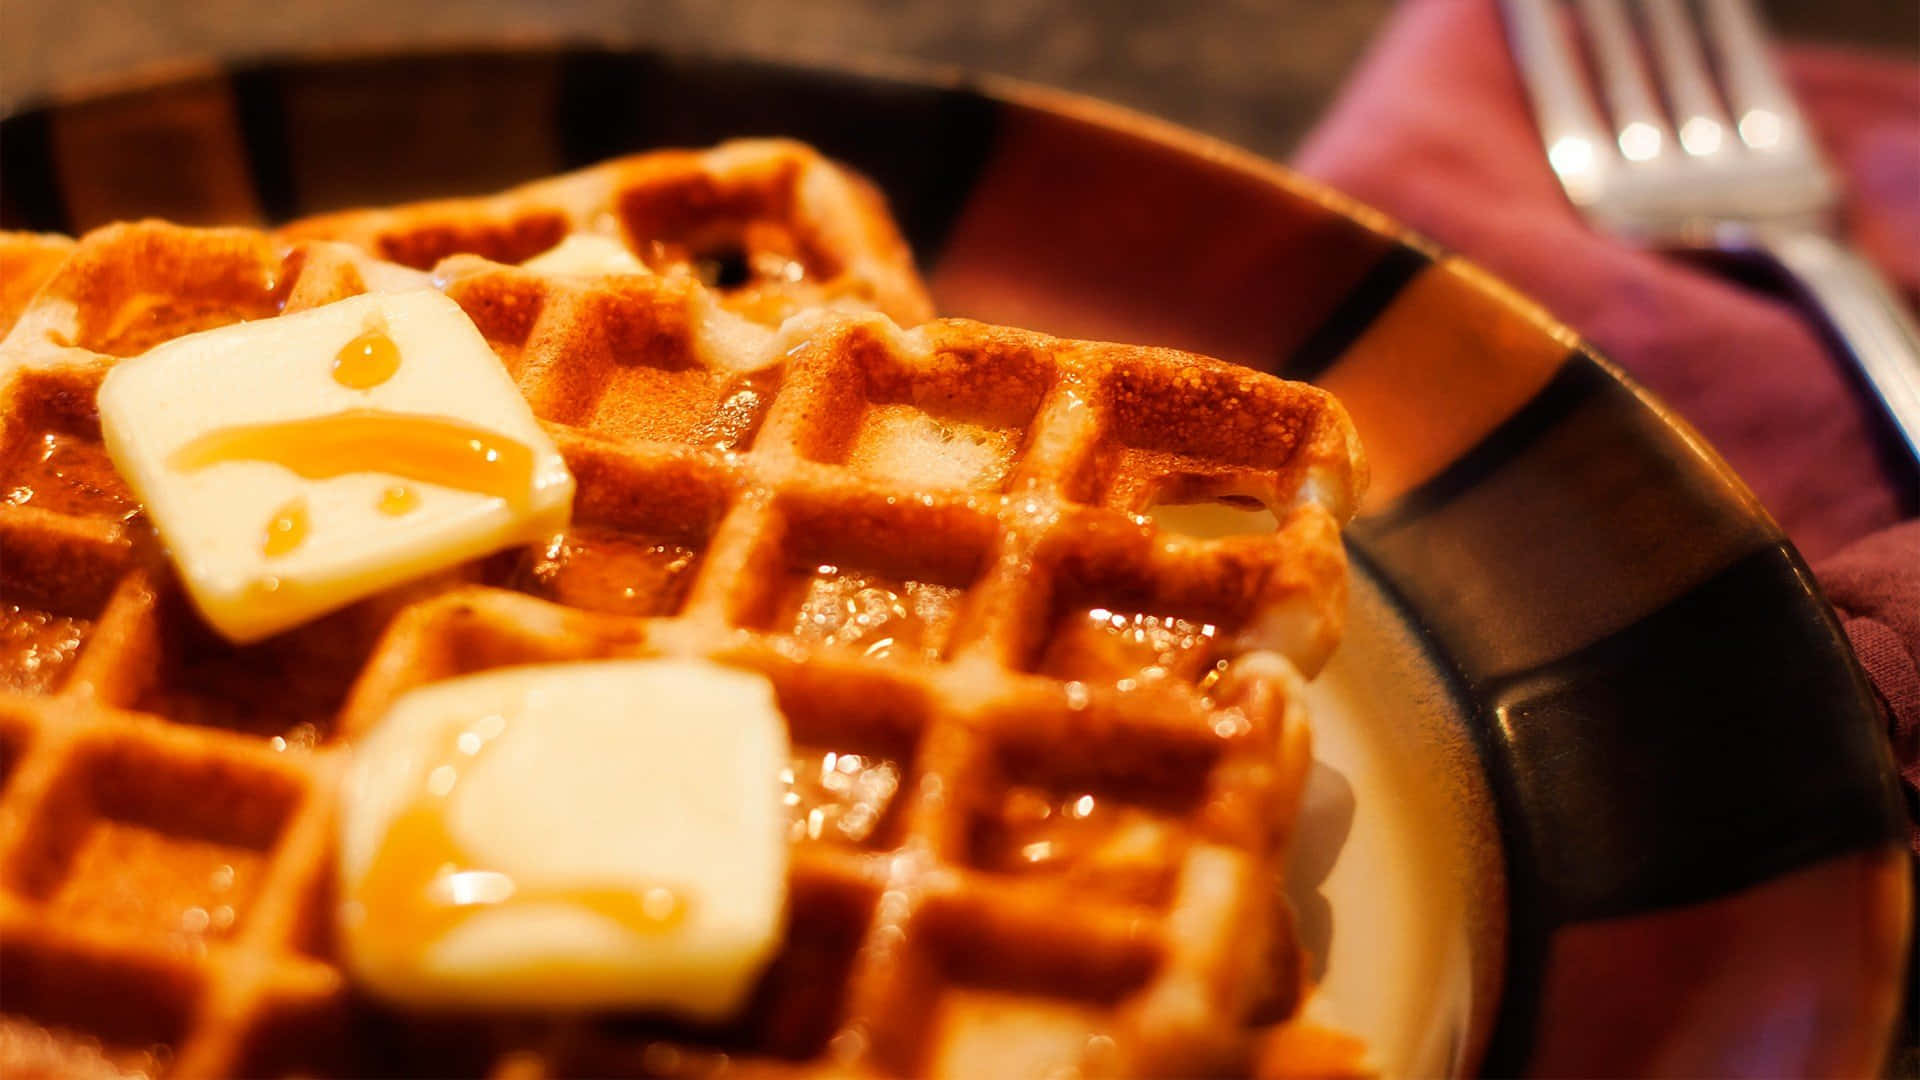 A delicious belgian waffle, freshly made